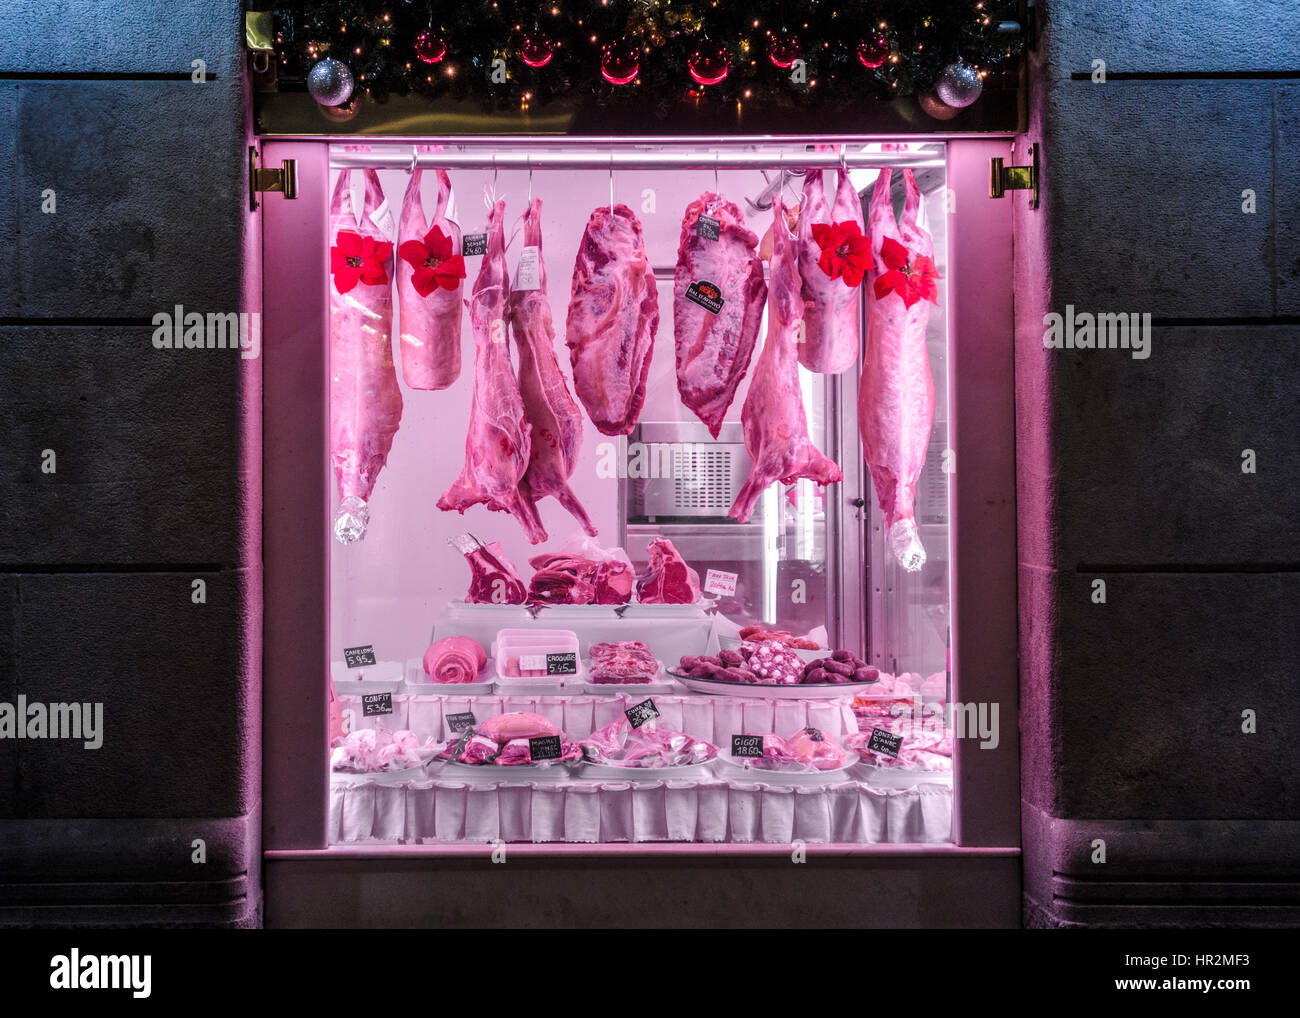 Barcelona, Spain, December 21, 2016. Butcher's store window with quartered pork and other pieces of farm animals. Stock Photo